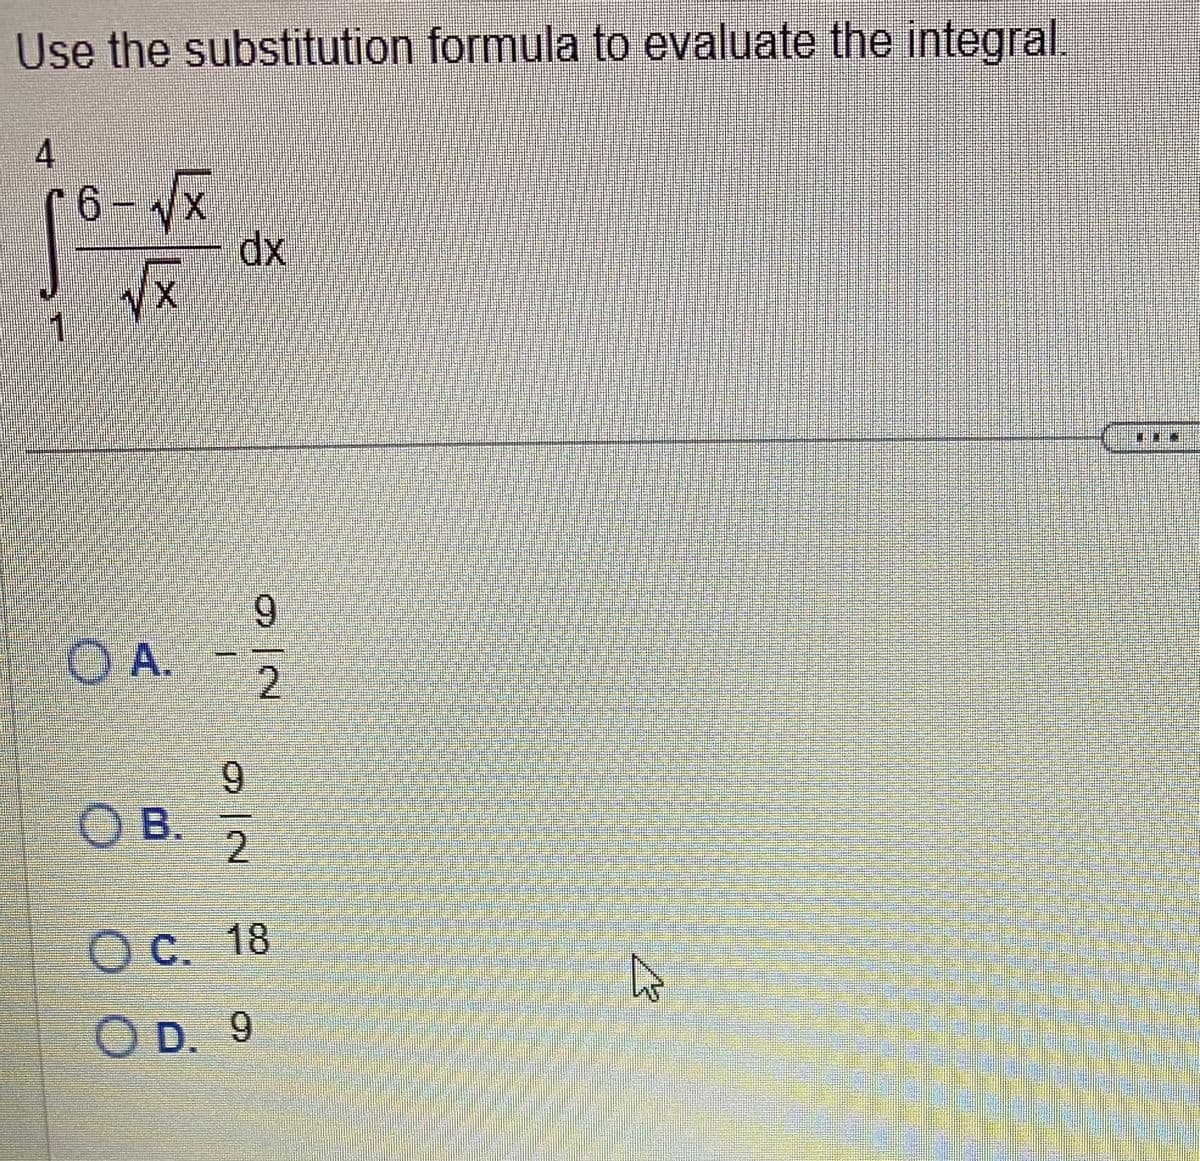 Use the substitution formula to evaluate the integral.
4
6-√x
X
1 √x
A.
OB.
dx
I
ON
O|N
2
2
O c. 18
OD. 9
B